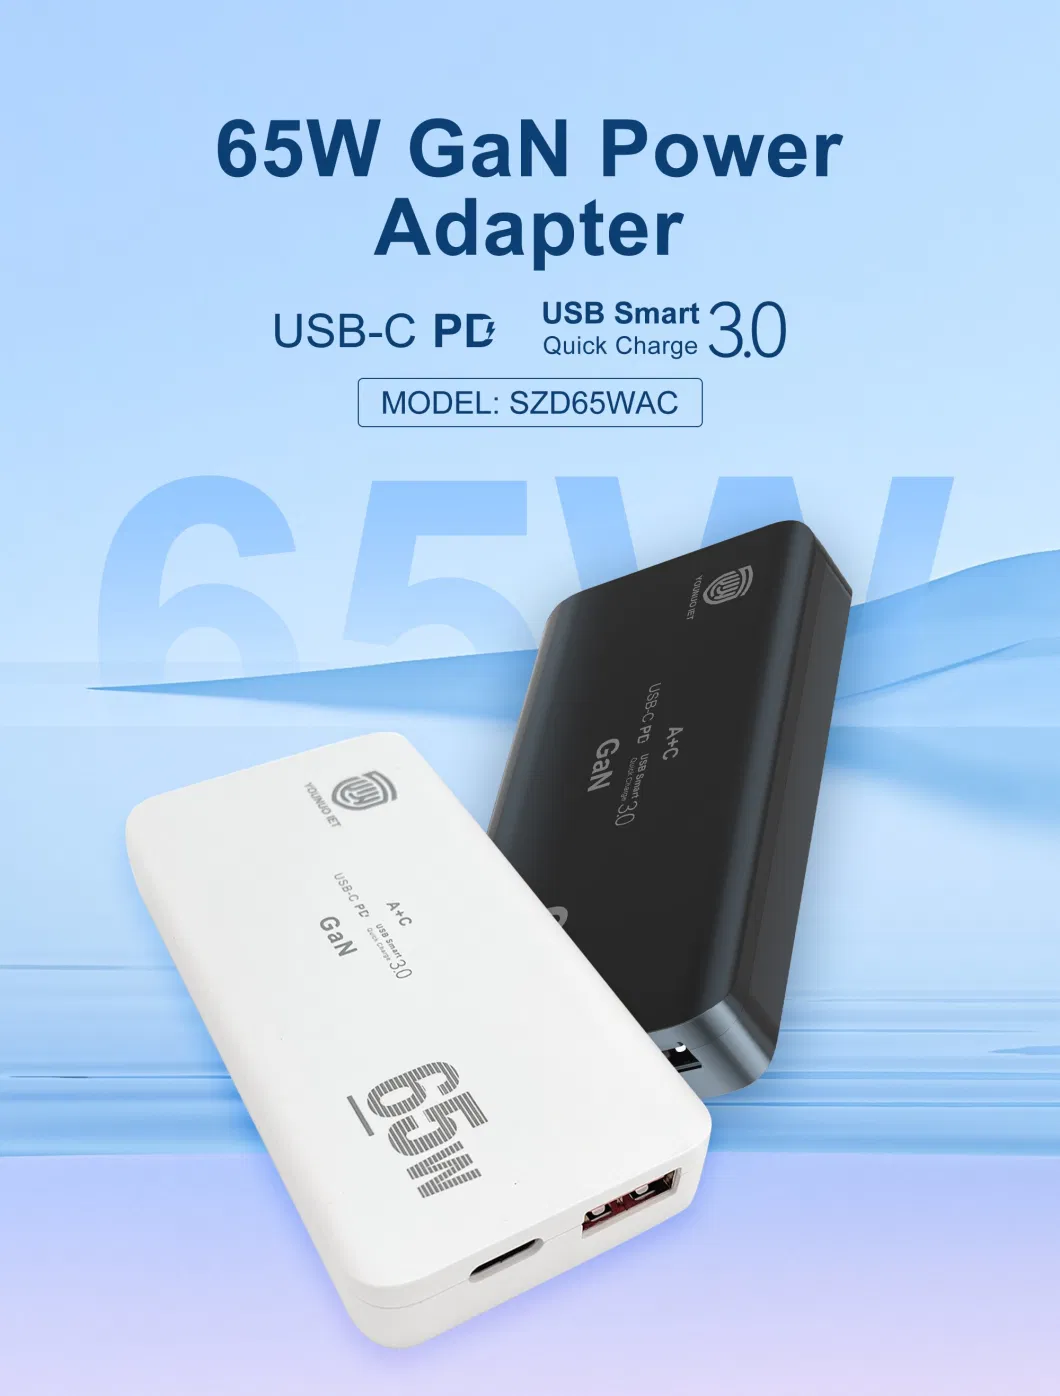 The Latest Smart Black Technology Qi Pd3.0 Fcp SCP PPS PE 2.0 GaN 65W Fast Charger